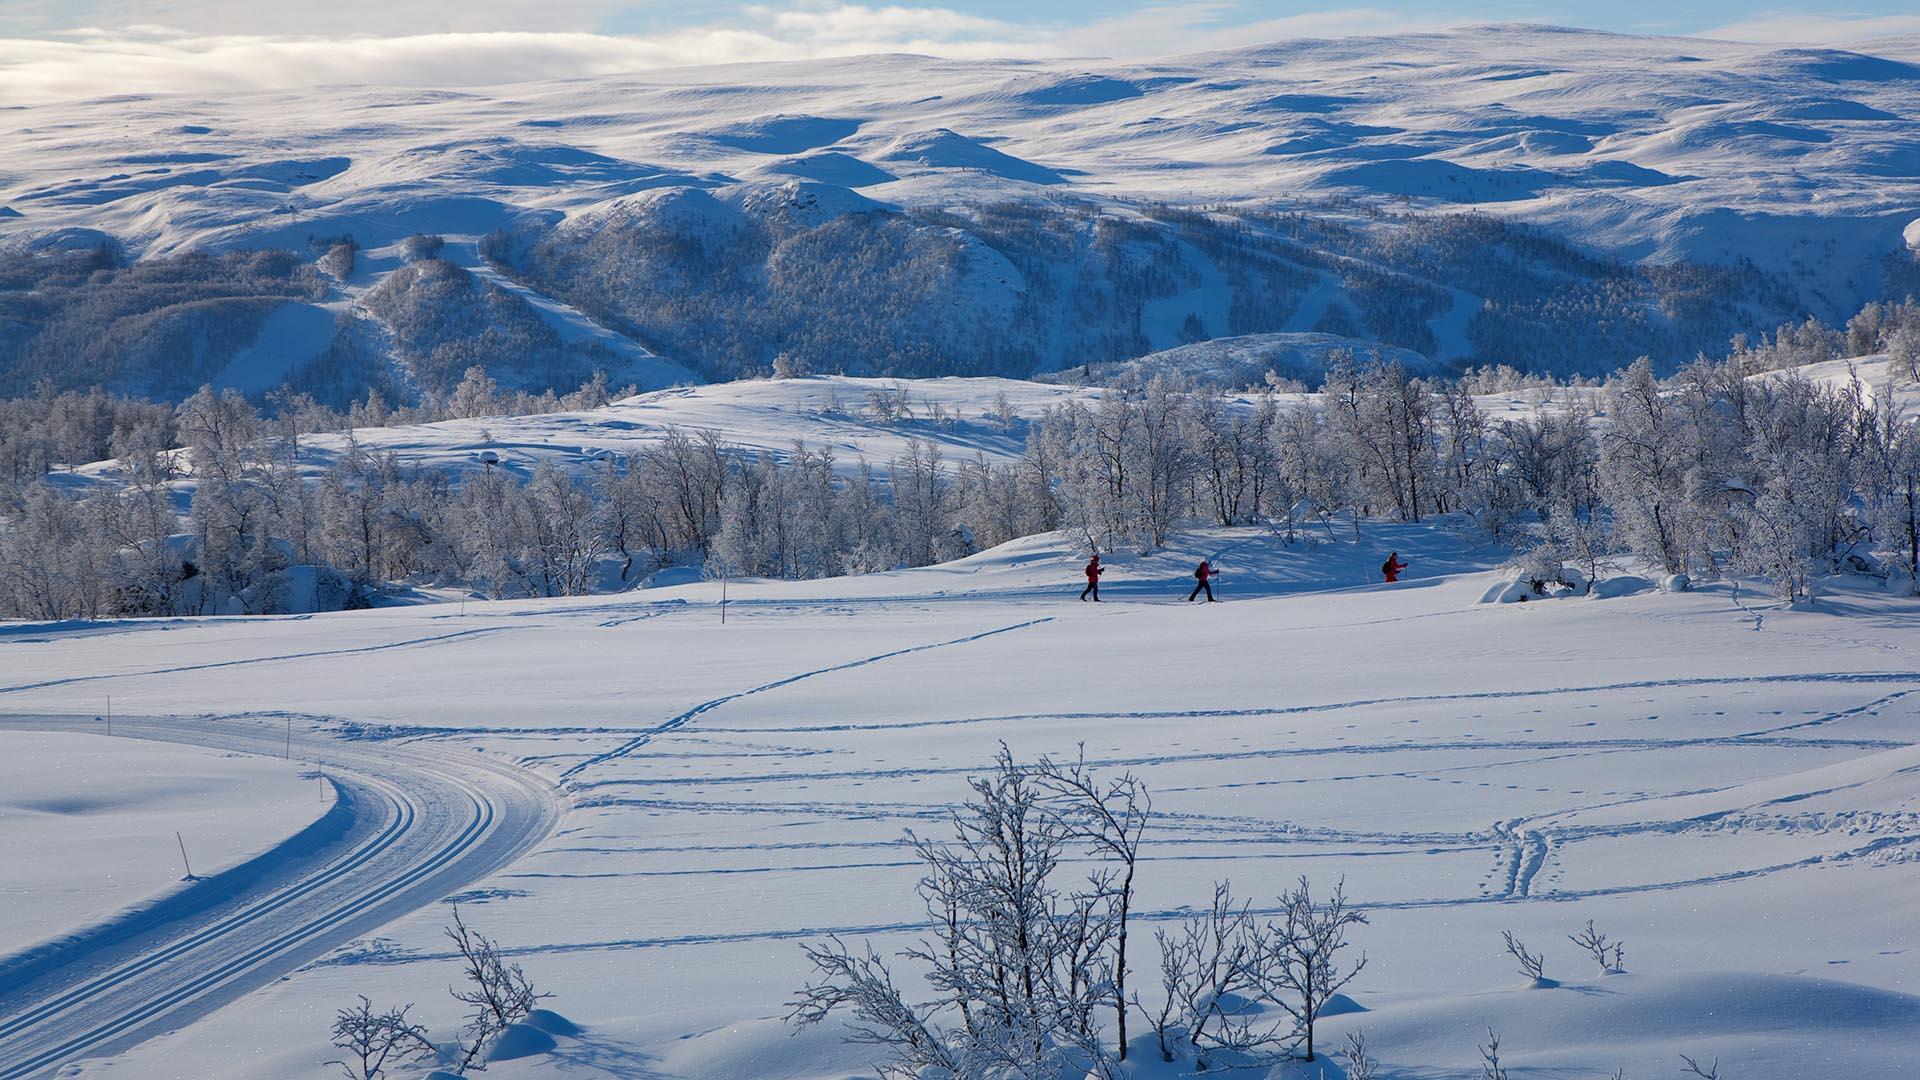 A winter wonderland landscape in the Norwegian mountains with freshly groomed cross-country skiing track and skiers.